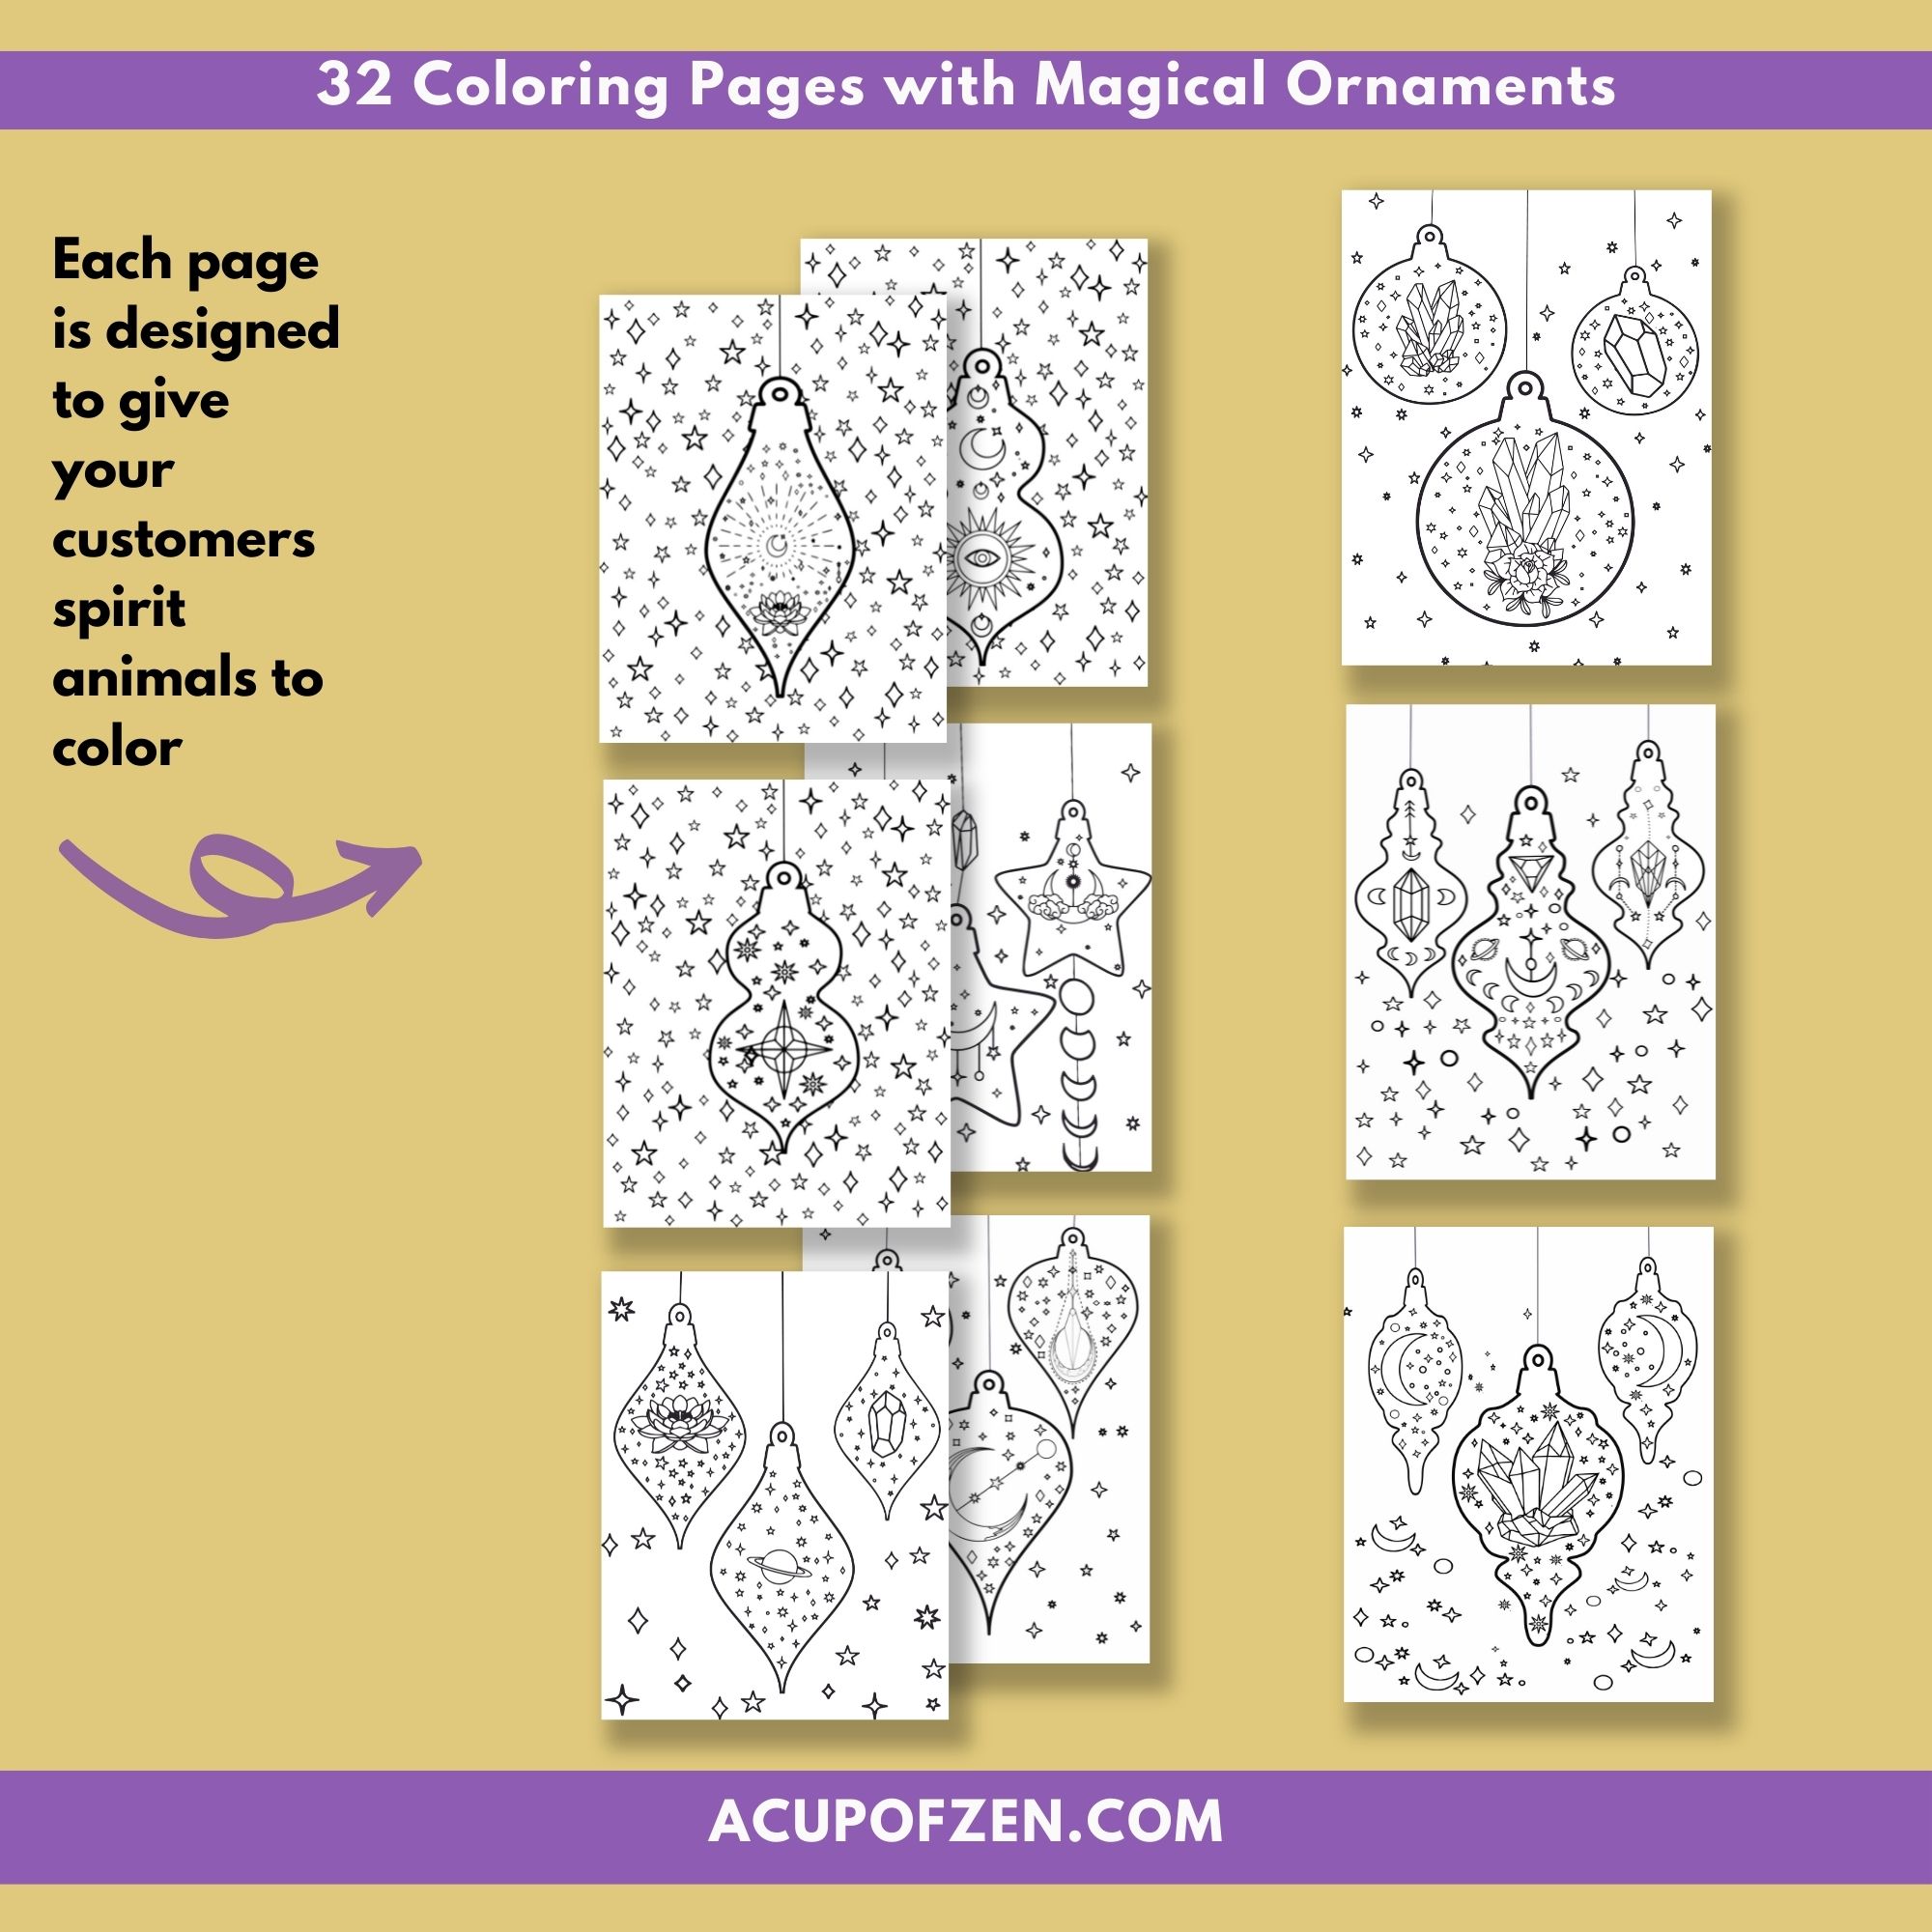 Spirit Animal Coloring Pages Commercial Use